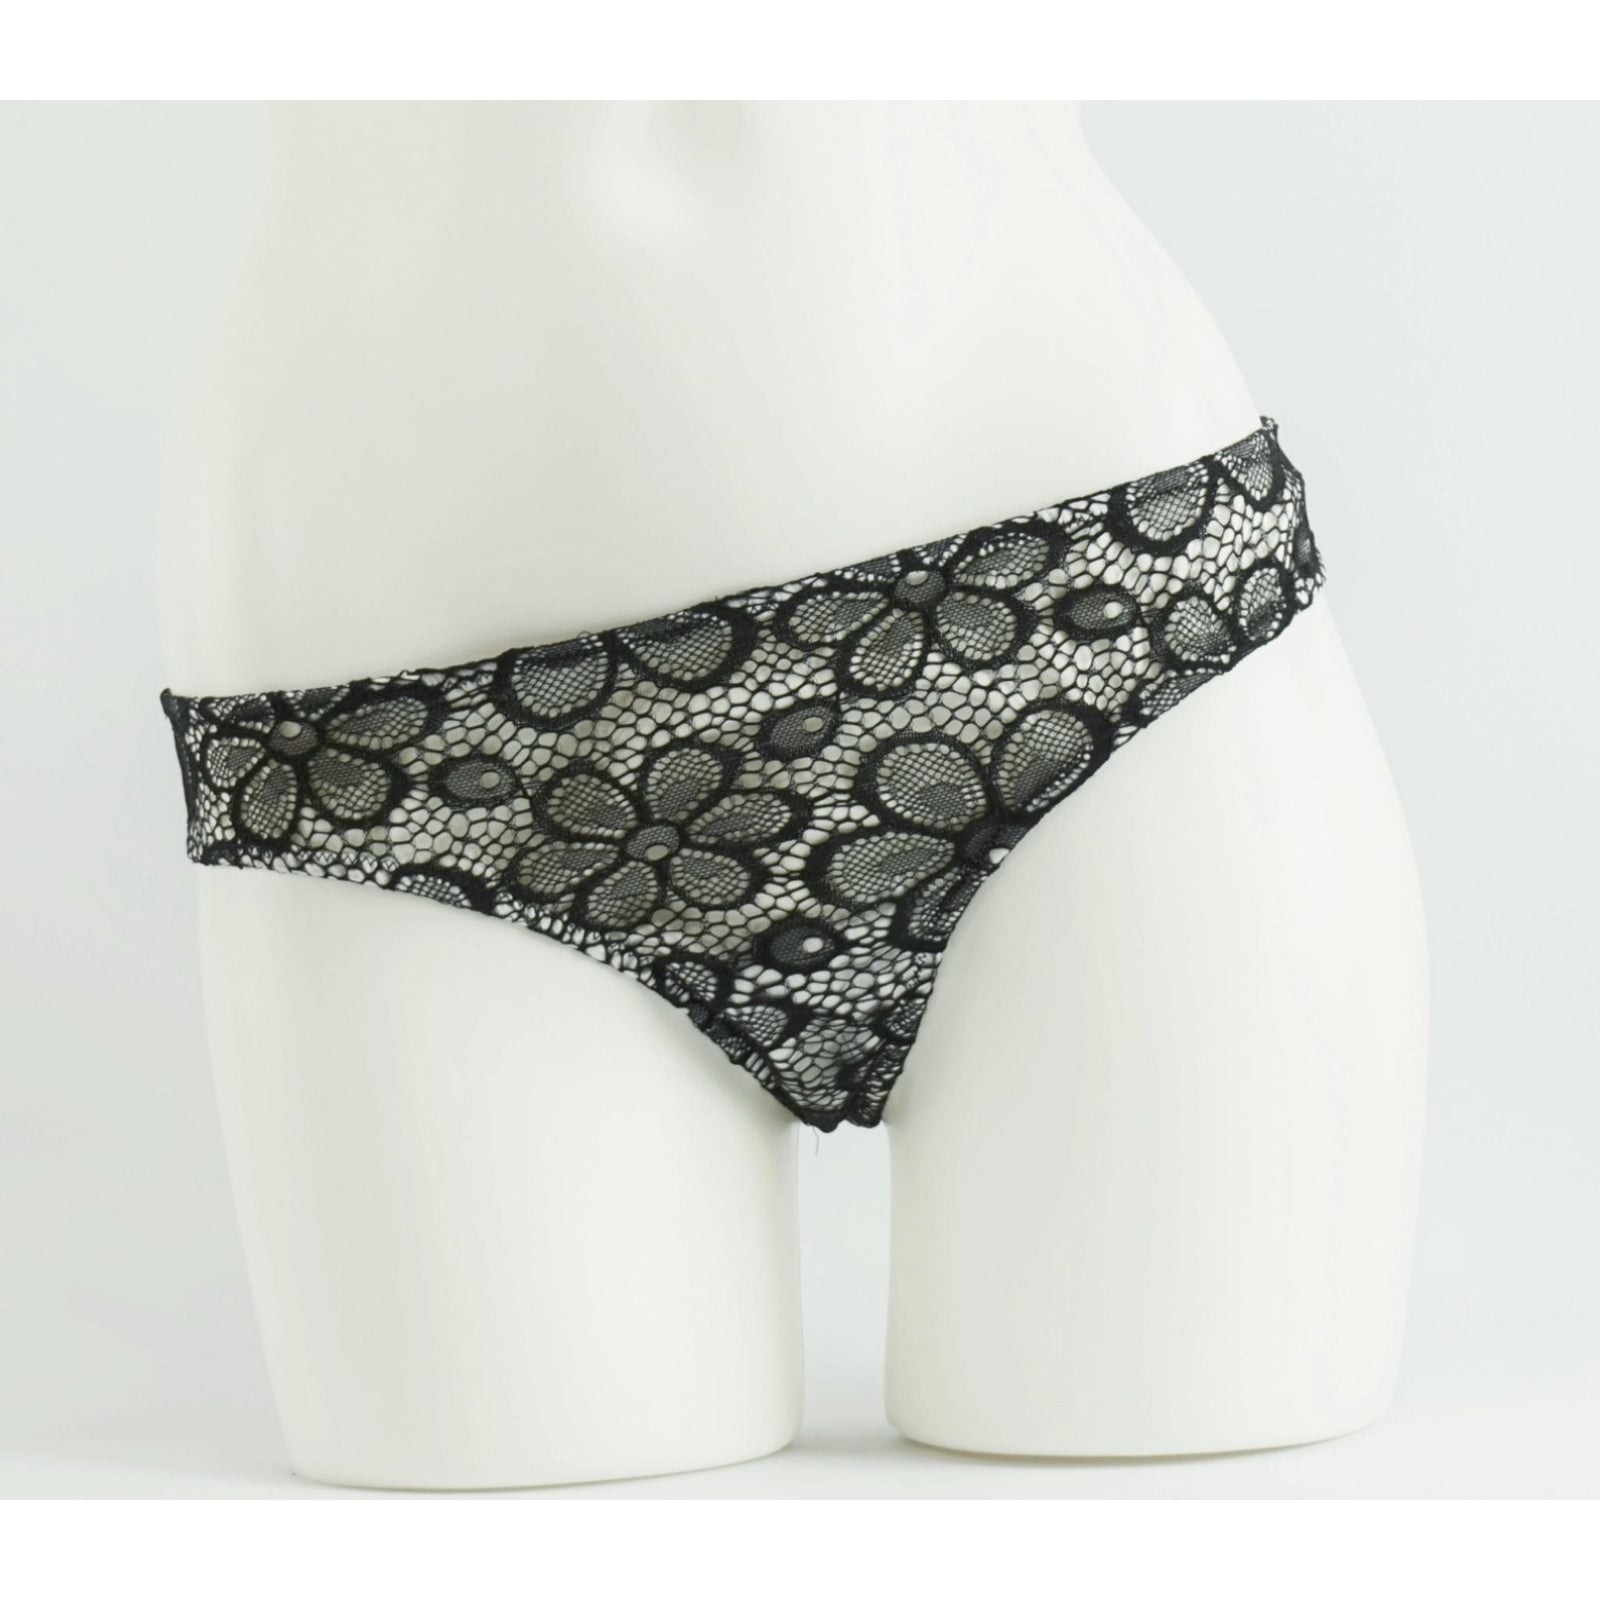 Panties - Mikayla Saleem Thong In Black/White With Floral Lace Overlay